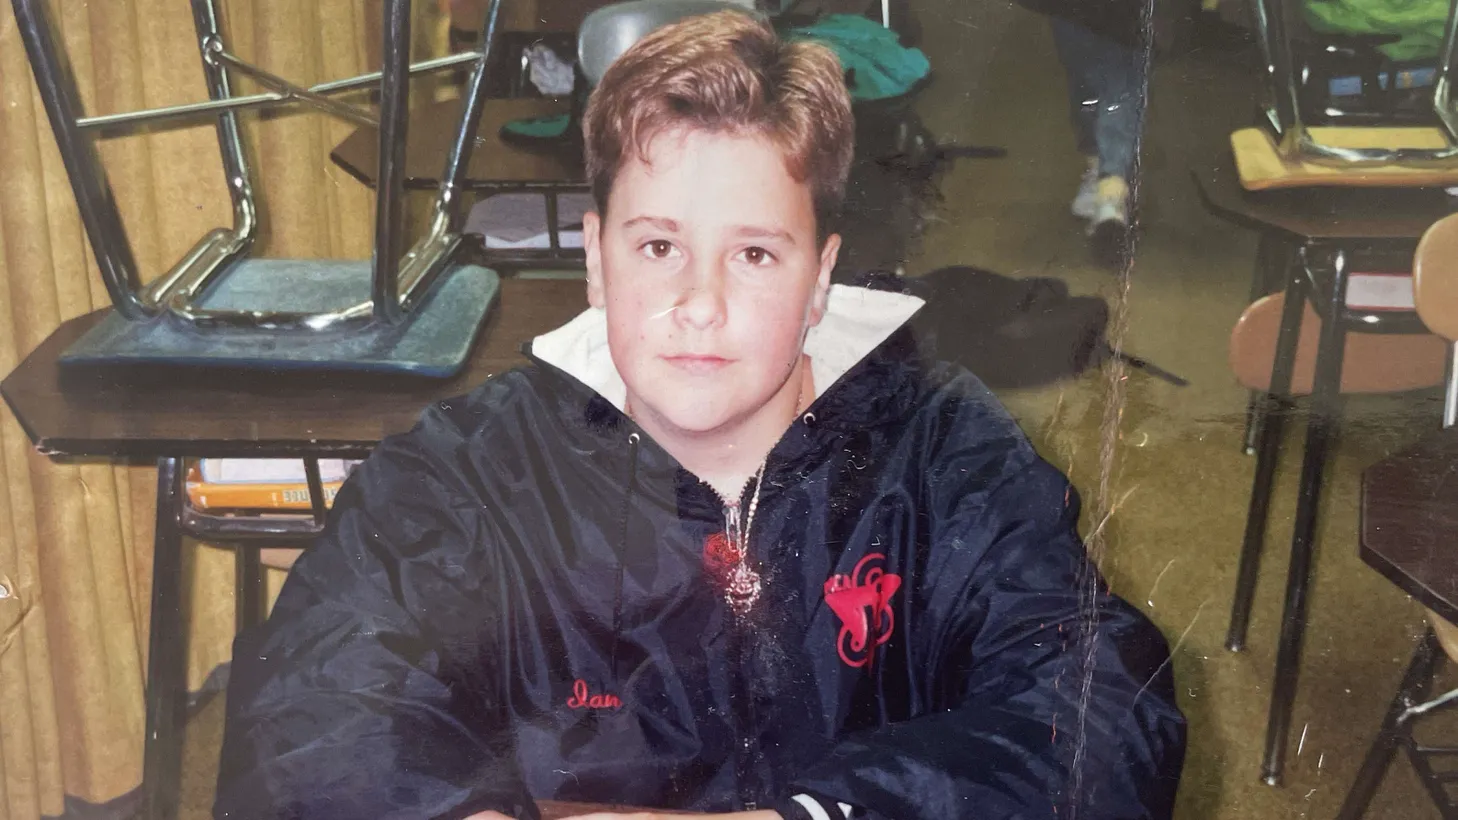 “When I was young years ago, being queer was a diagnosis and you could be segregated and separated from ‘normal kids.’ And that is a huge problem,” David Ambroz recalls of his early teen years in foster care.